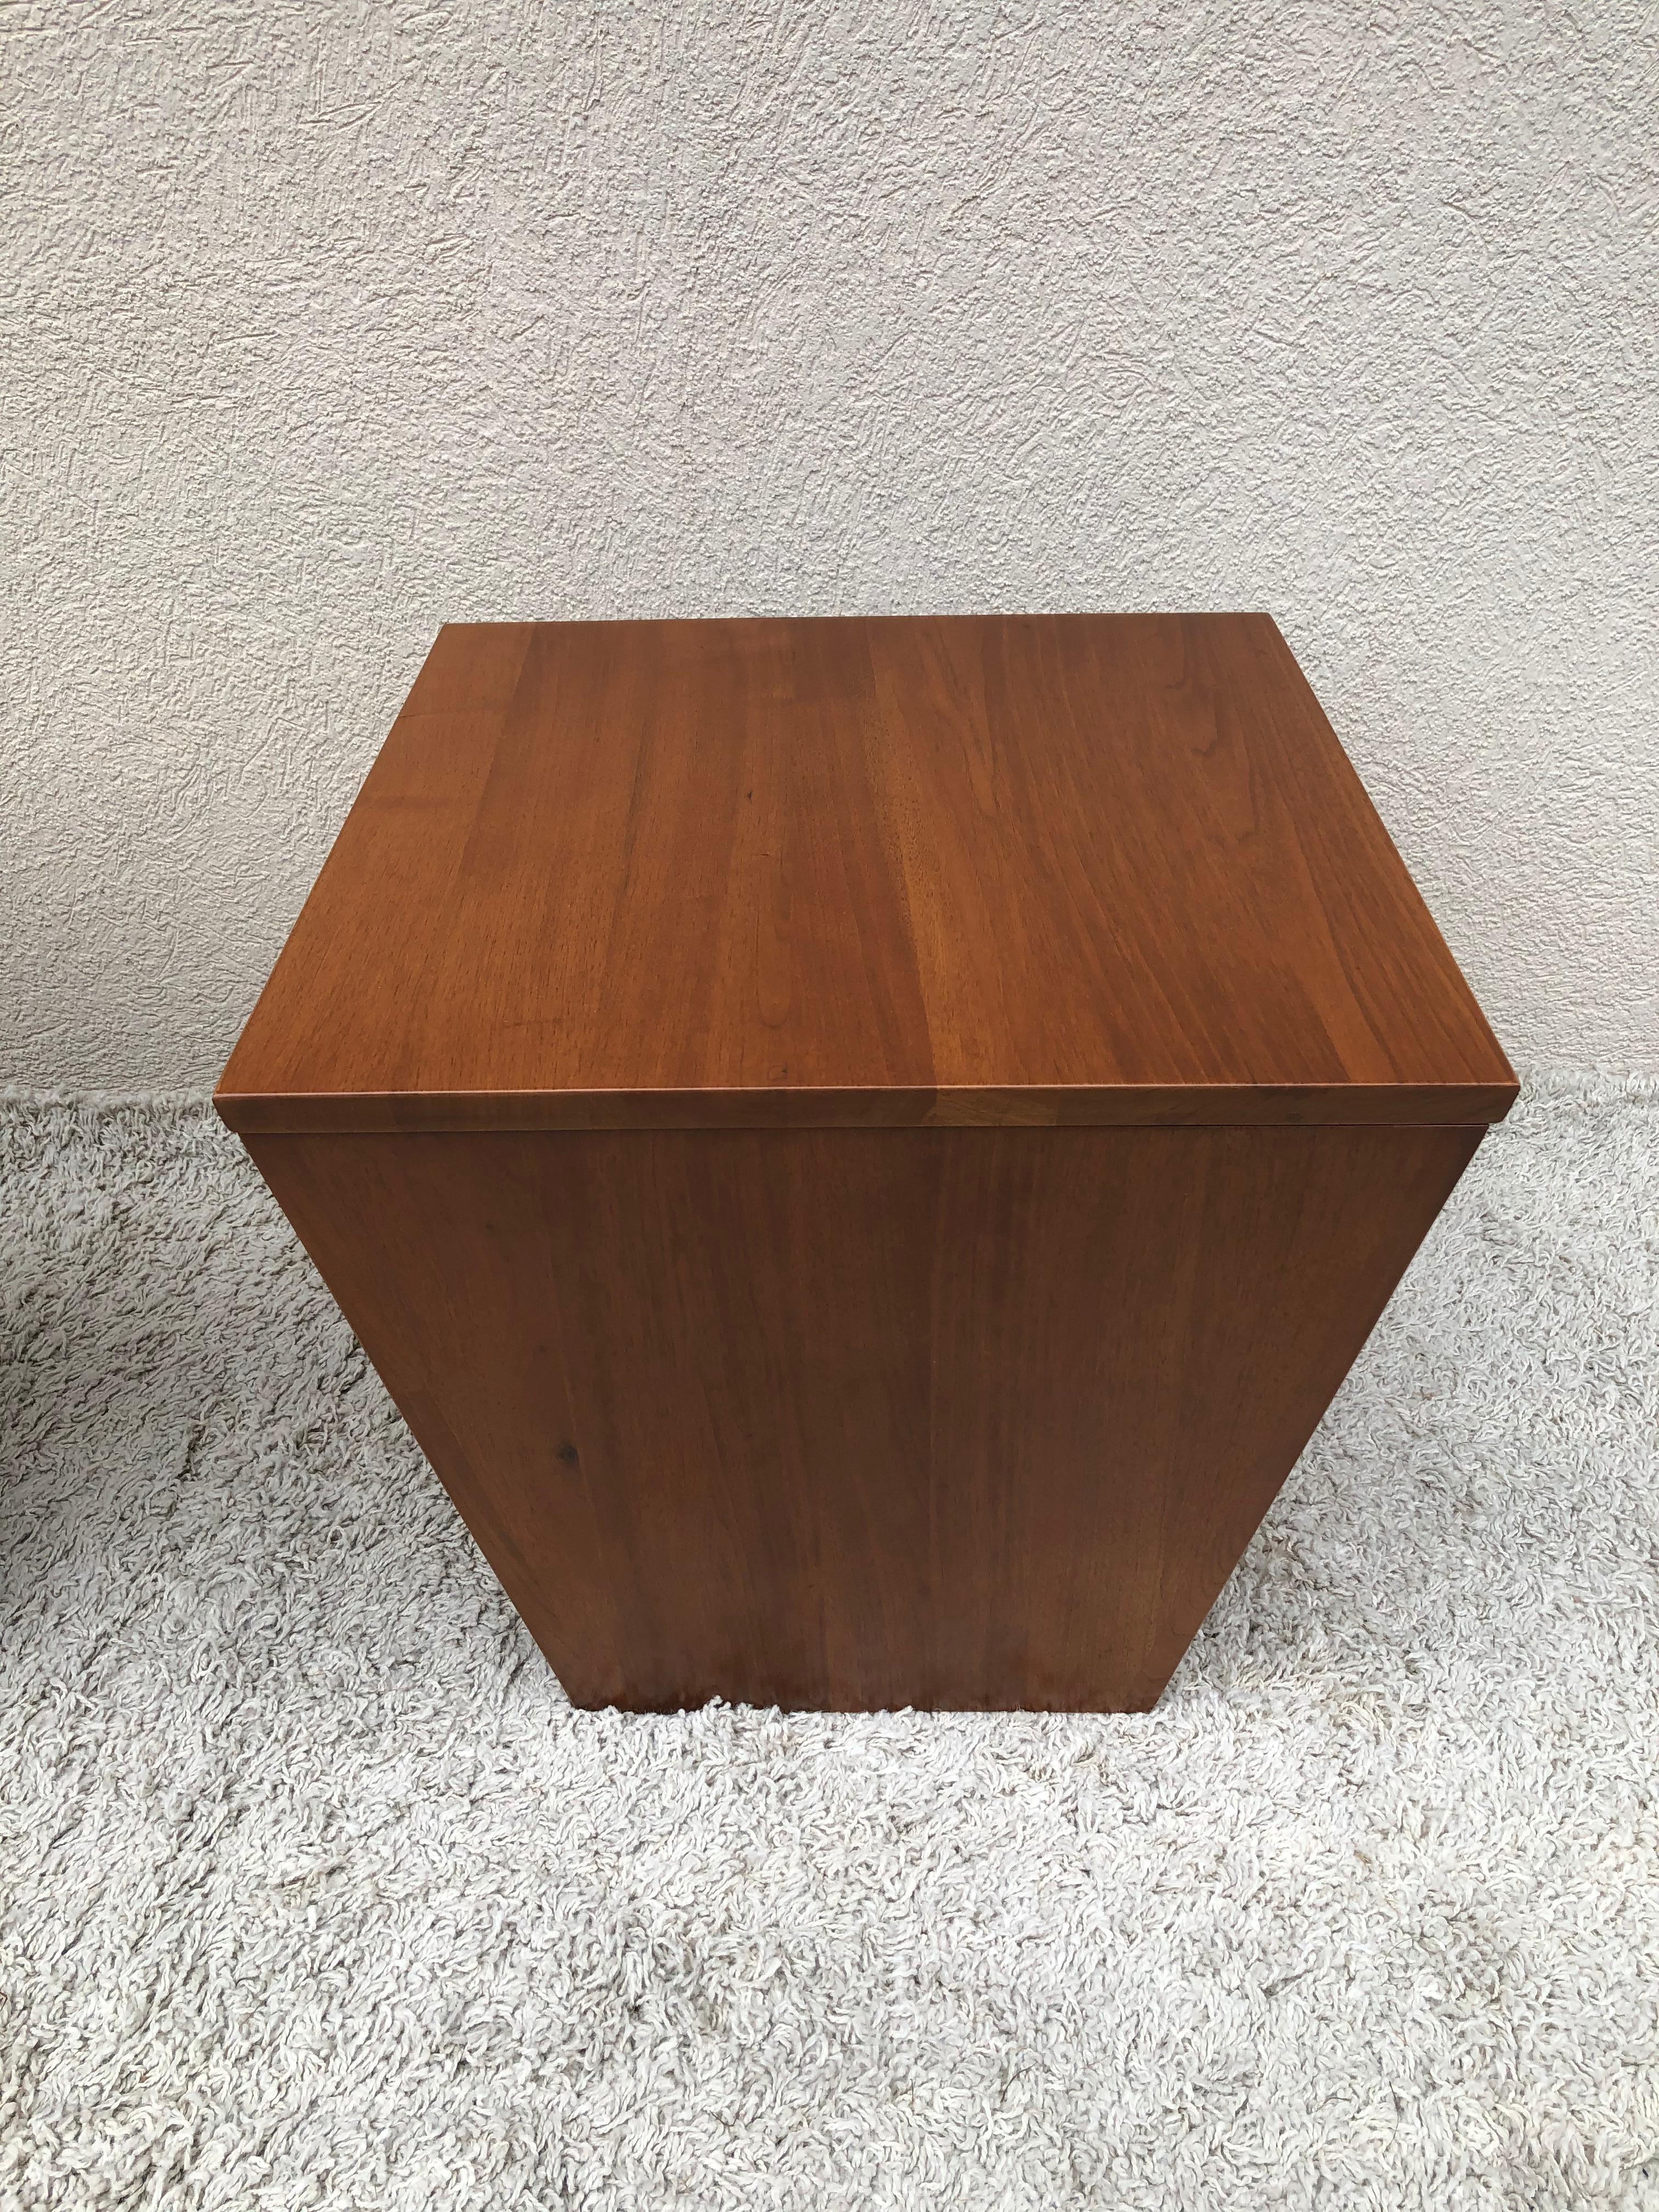 Mahogany Pair of Midcentury End Table/ Cube Boxes with Storage Interiors For Sale